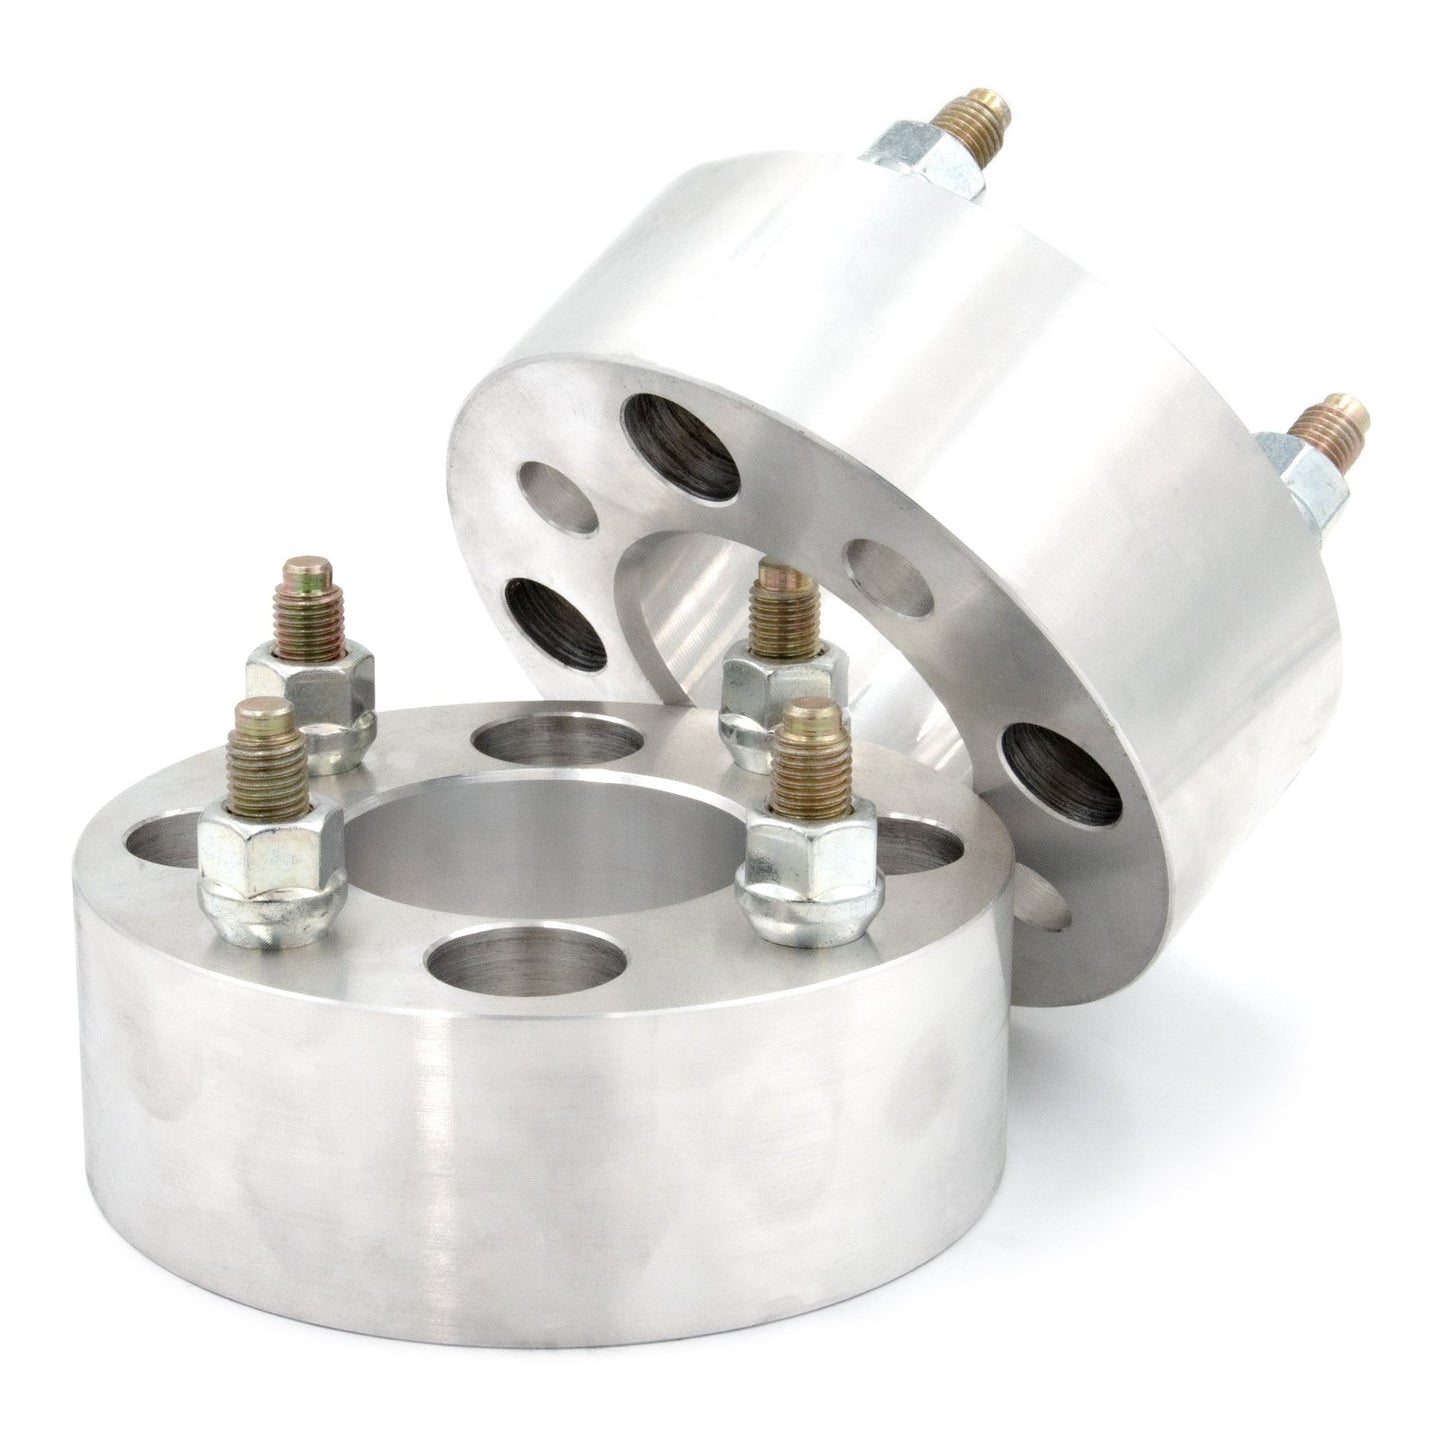 4x110 to 4x156 Wheel Spacer/Adapter - Thickness: 3/4"- 4"